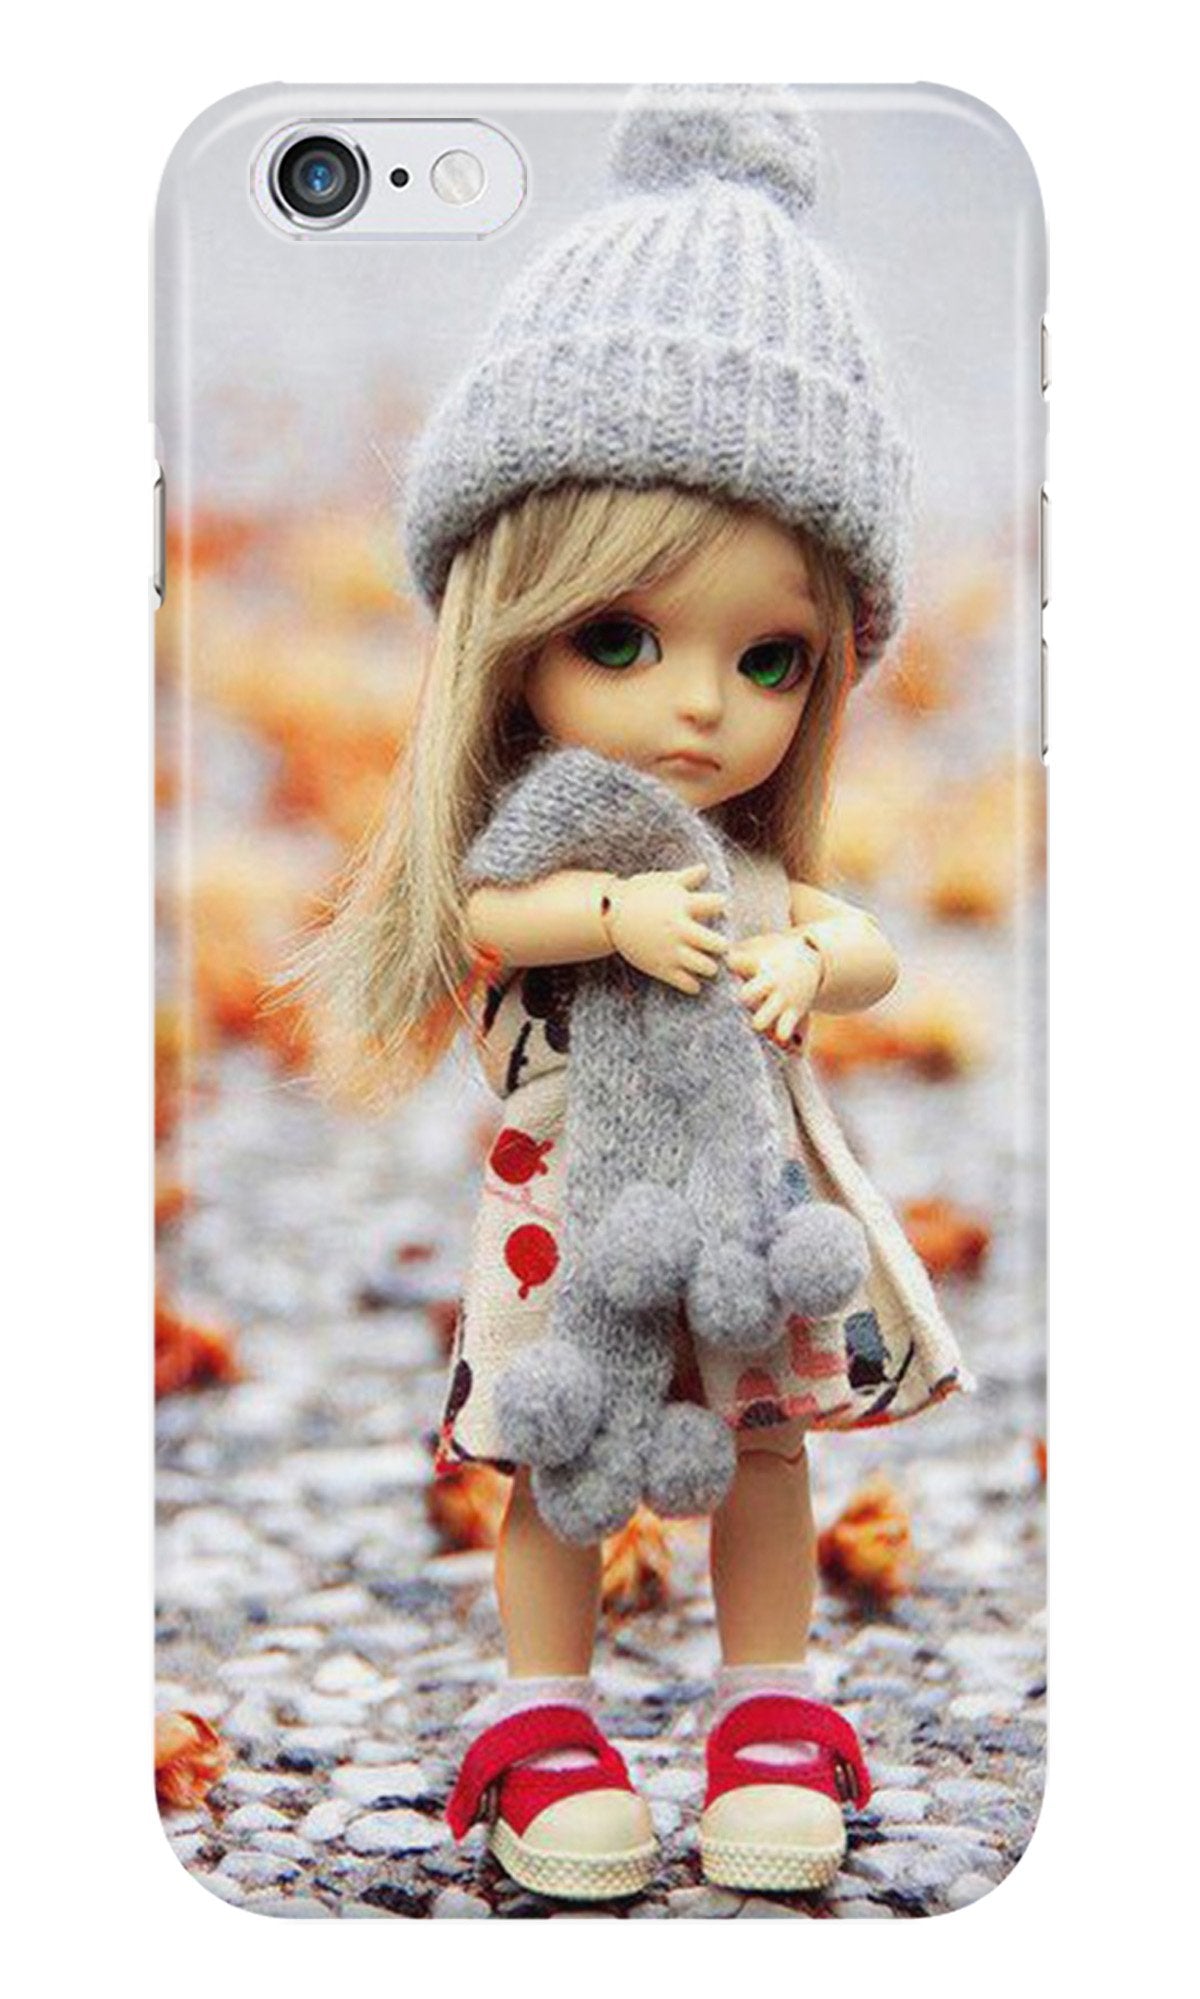 Cute Doll Case for iPhone 6 Plus/ 6s Plus